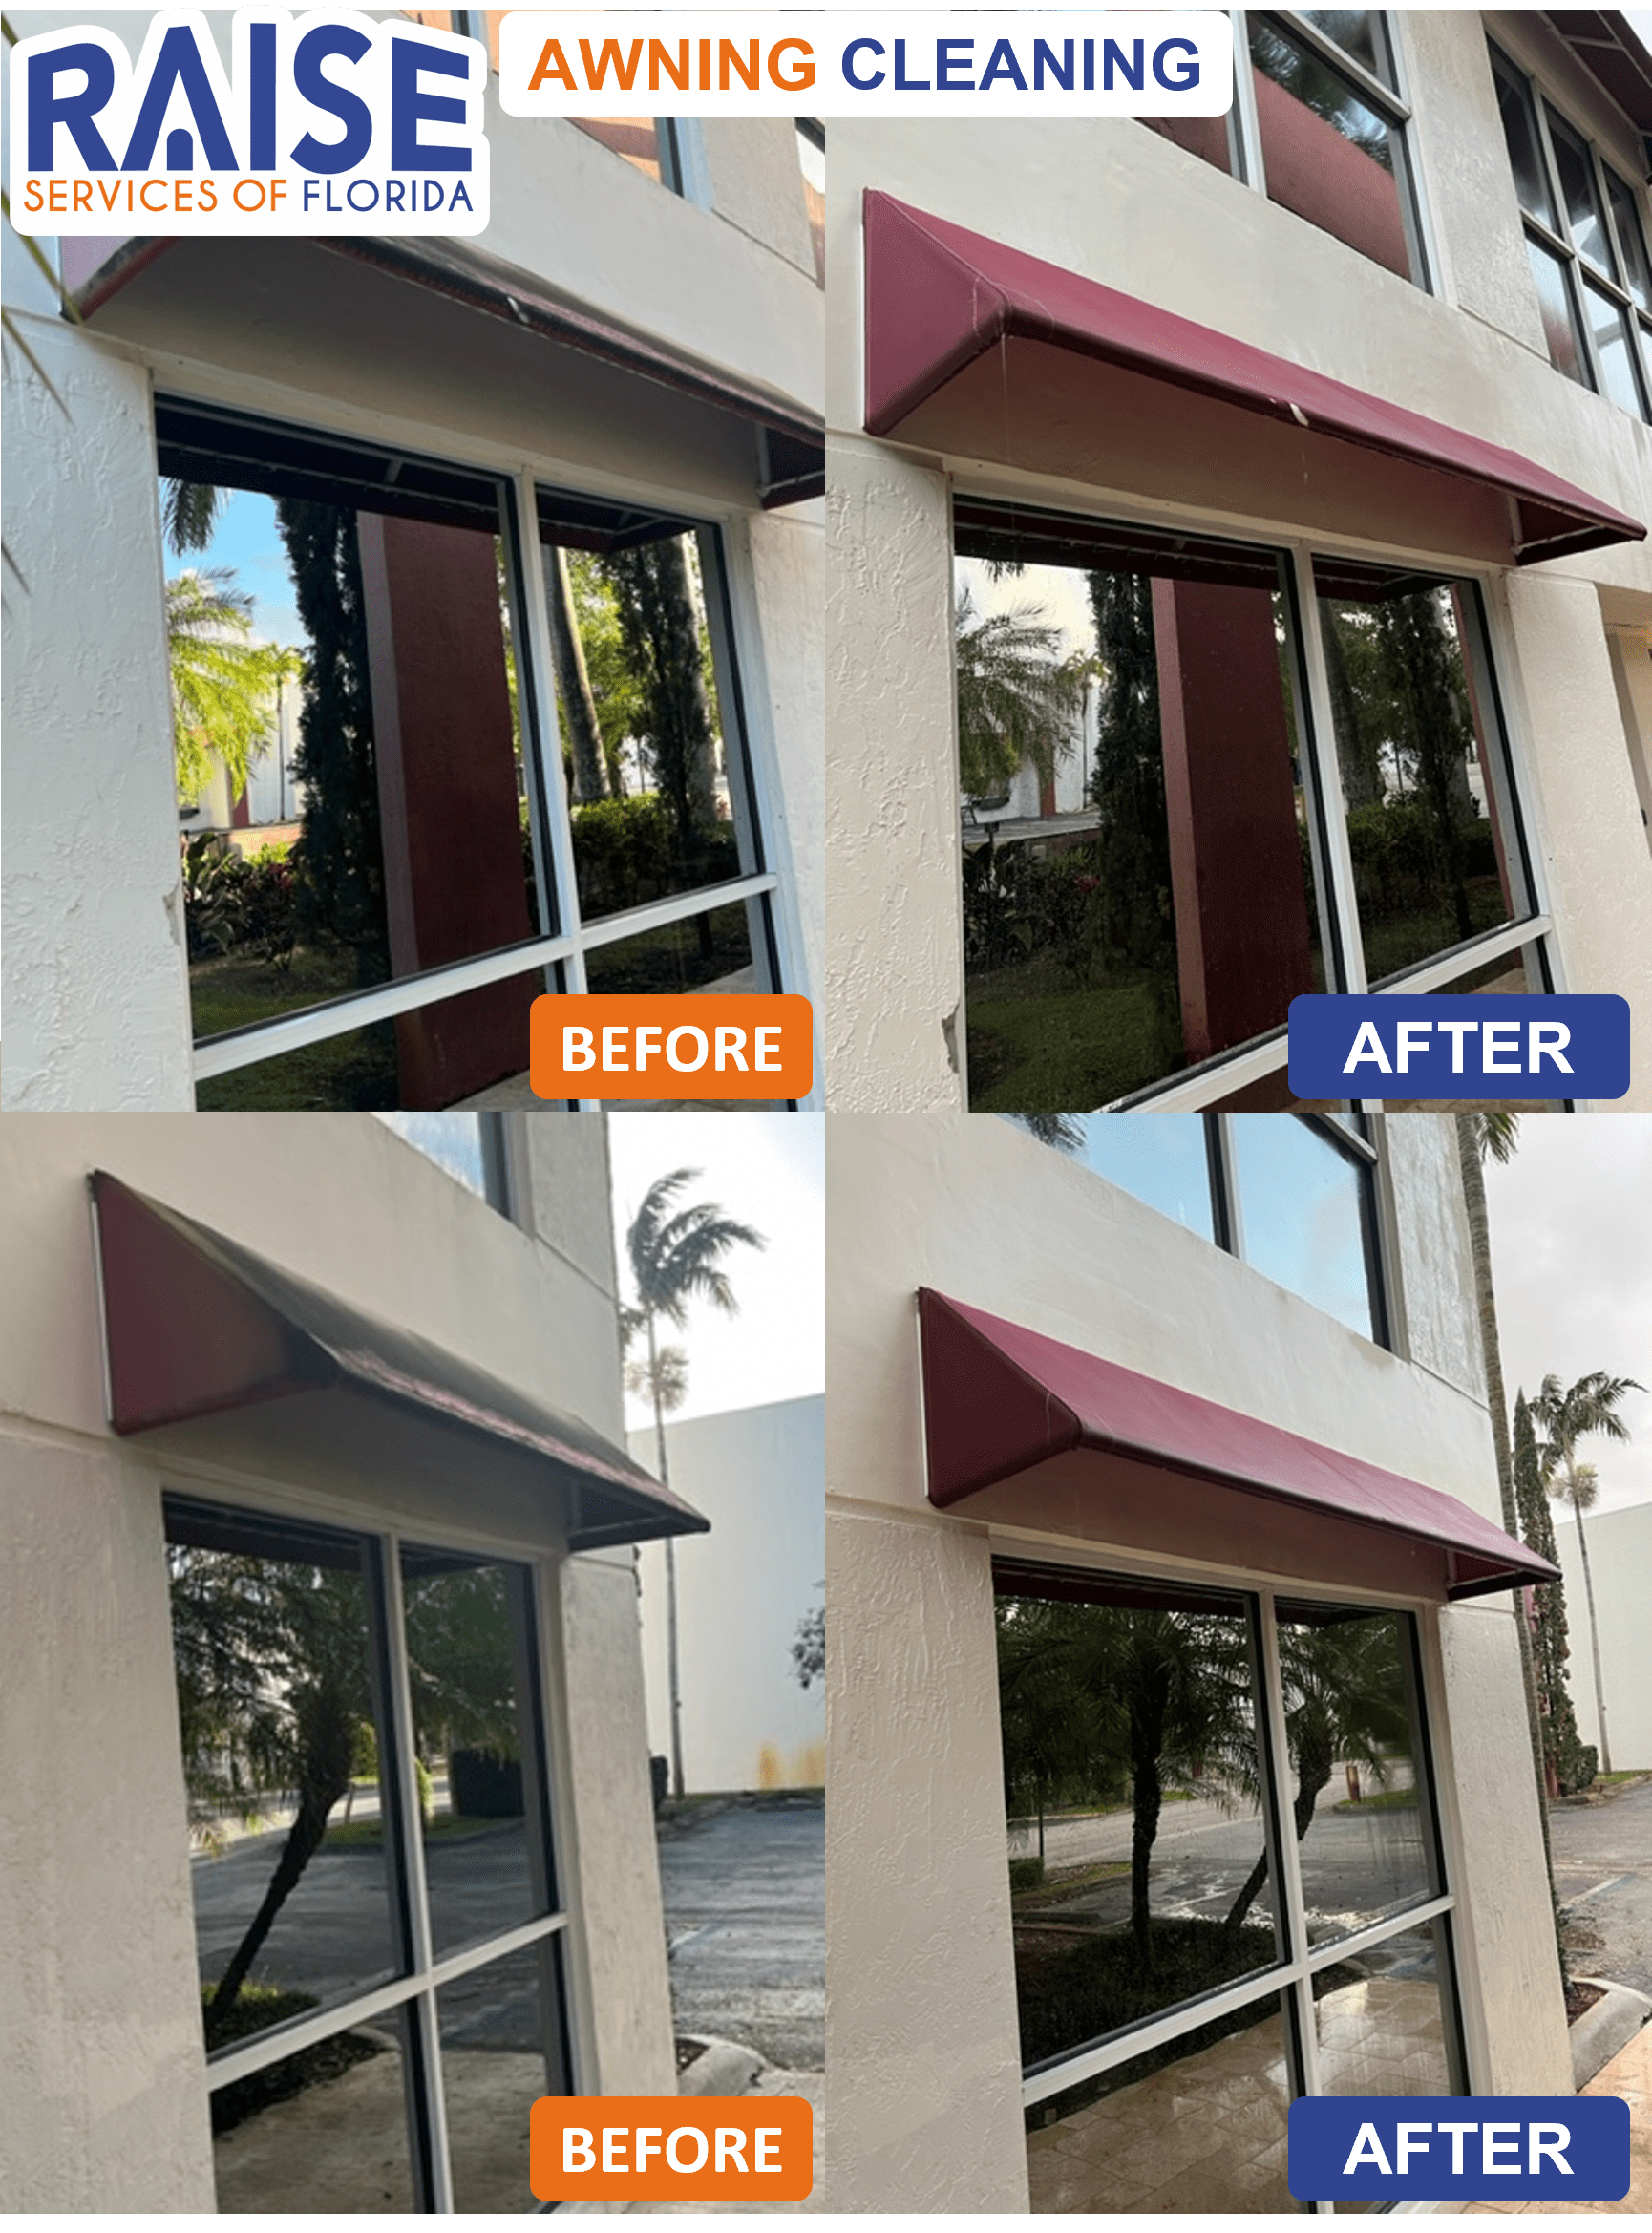 Awning cleaning in Doral